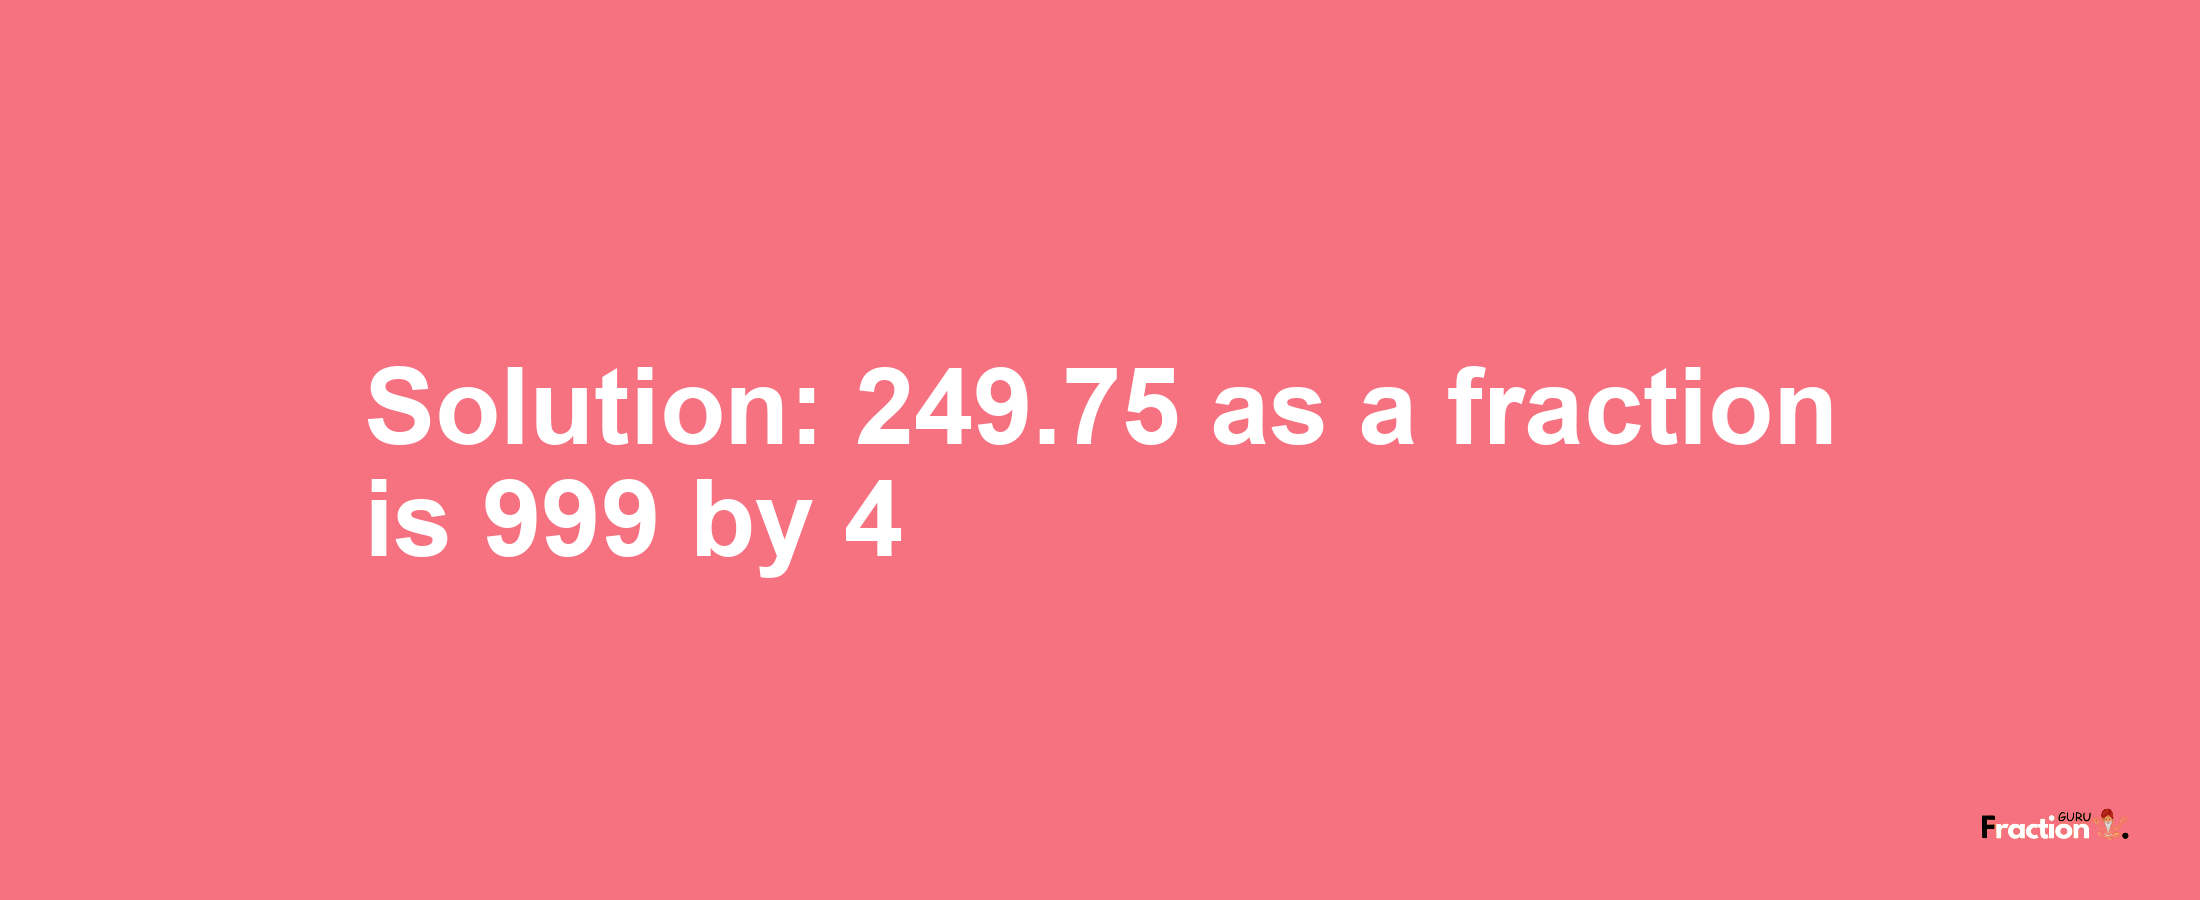 Solution:249.75 as a fraction is 999/4